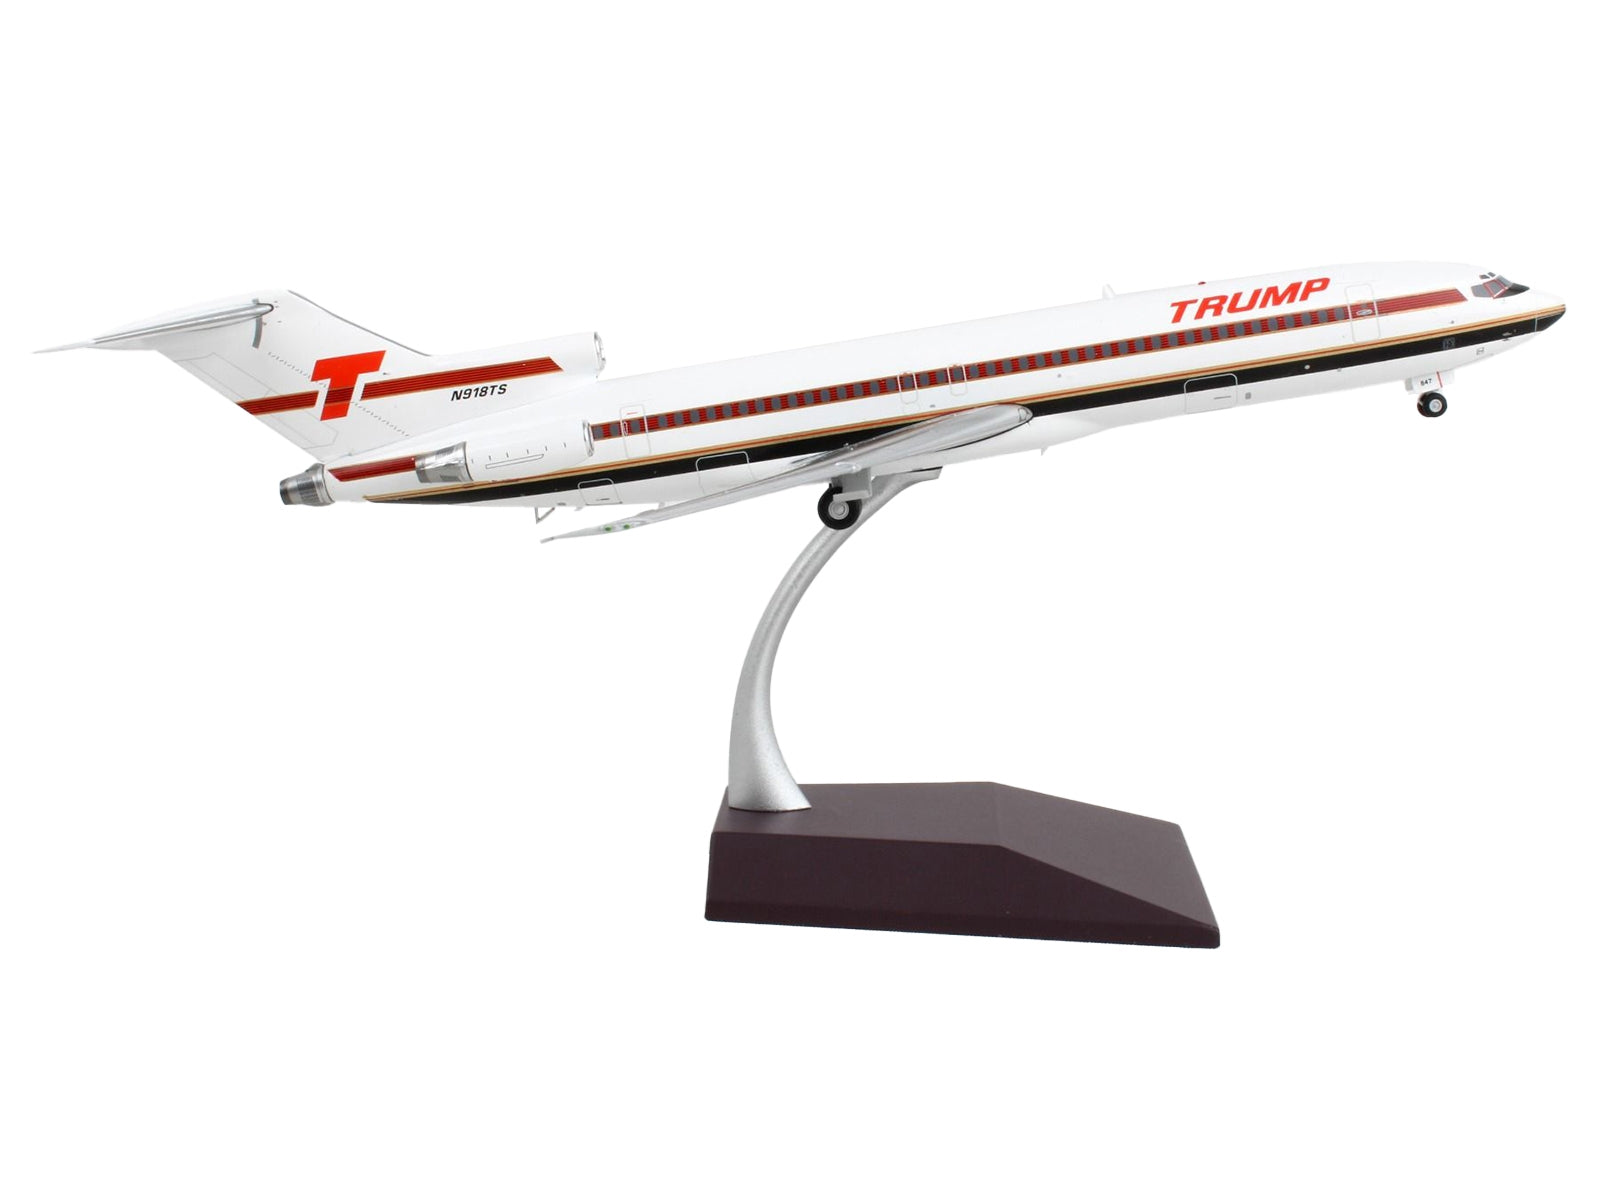 Boeing 727-200 Commercial Aircraft "Trump Shuttle" White with Red Stripes "Gemini 200" Series 1/200 Diecast Model Airplane by GeminiJets